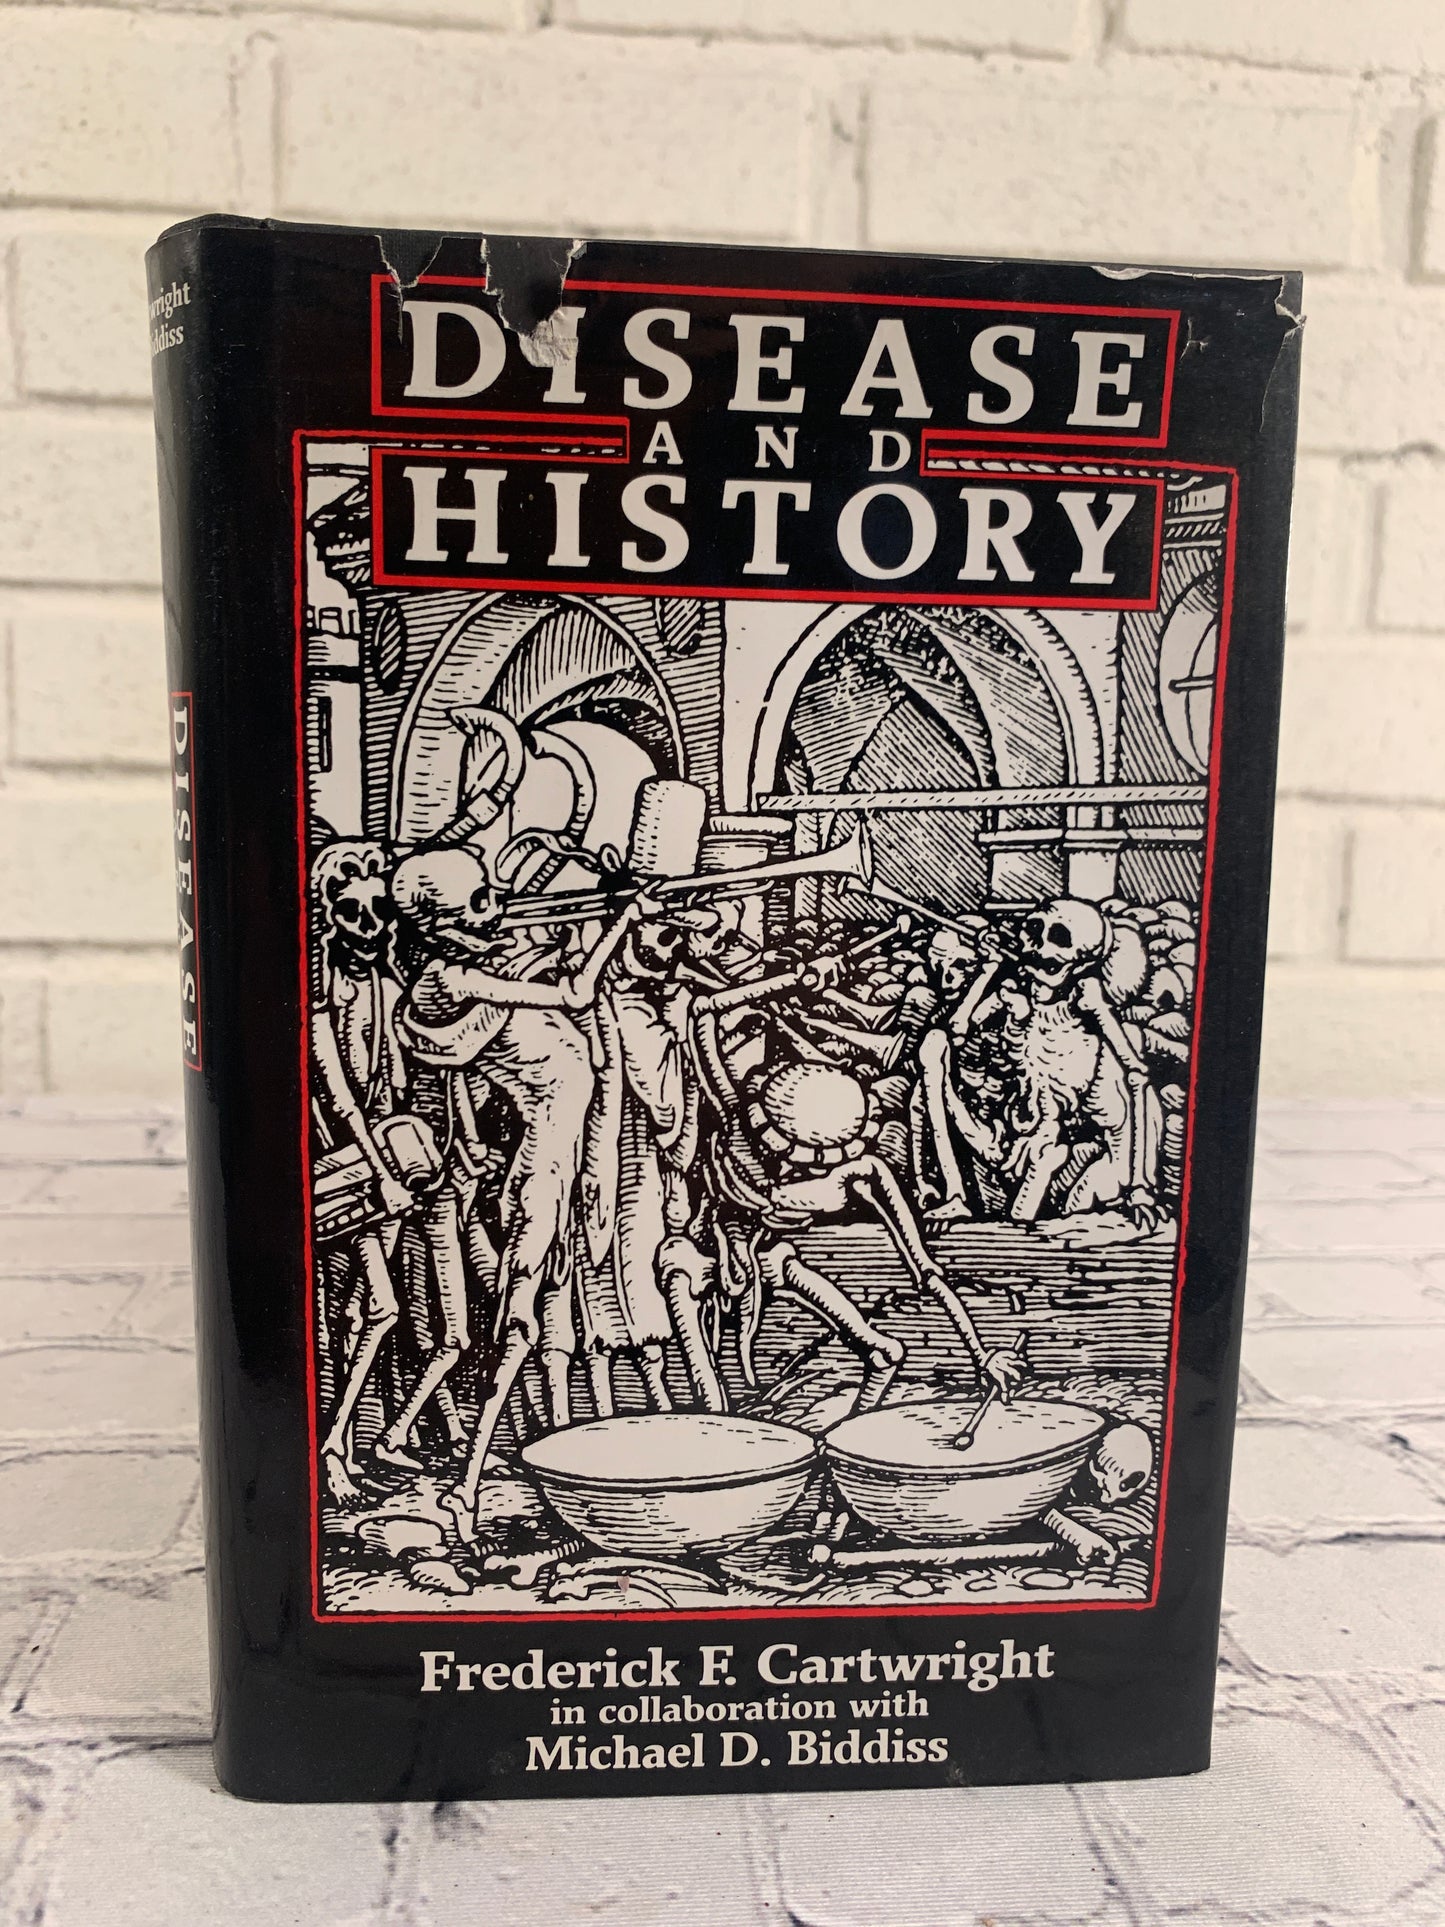 Disease and History by Frederick Cartwright [1991]